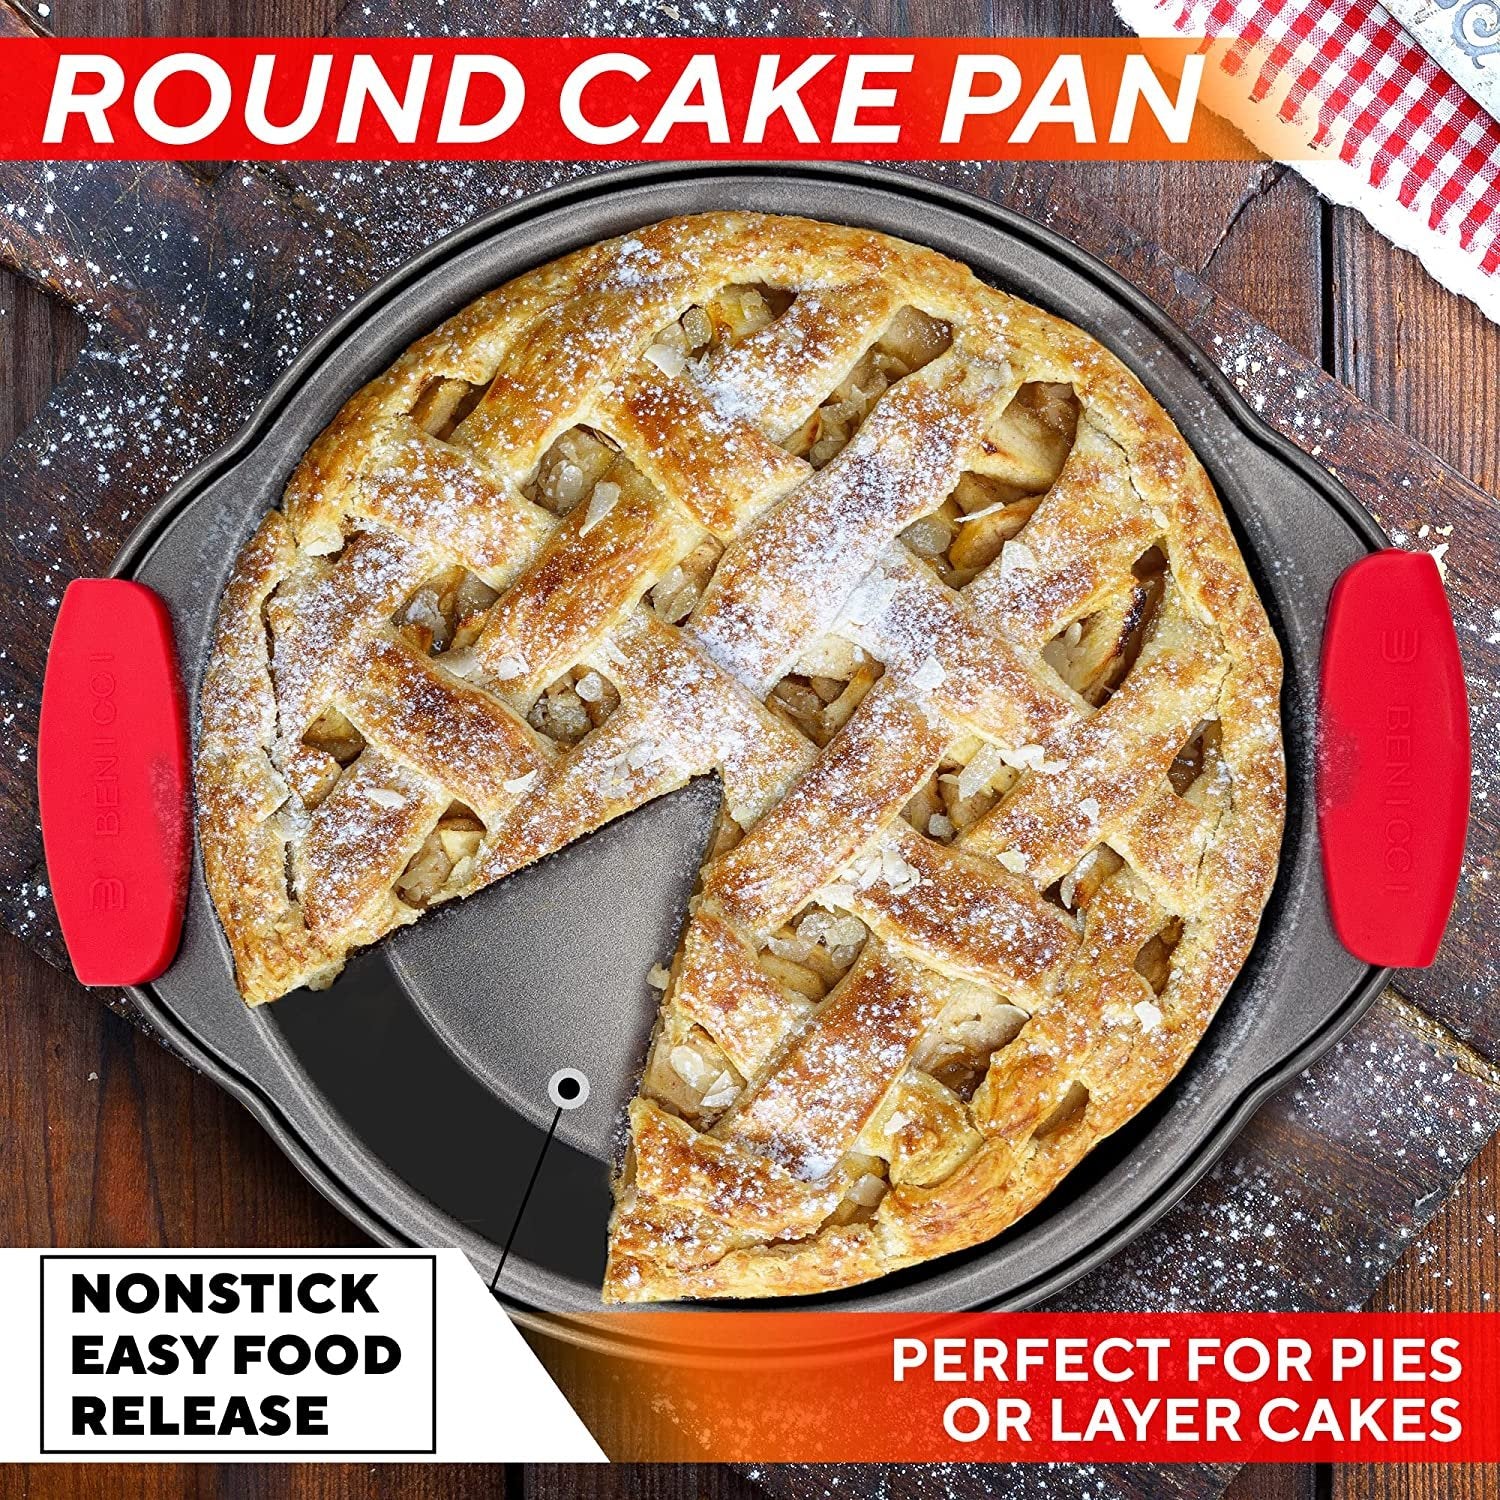  E&B Set of 2 Round Easy Oven Round Cake Bake Pans For Kids Oven:  Home & Kitchen